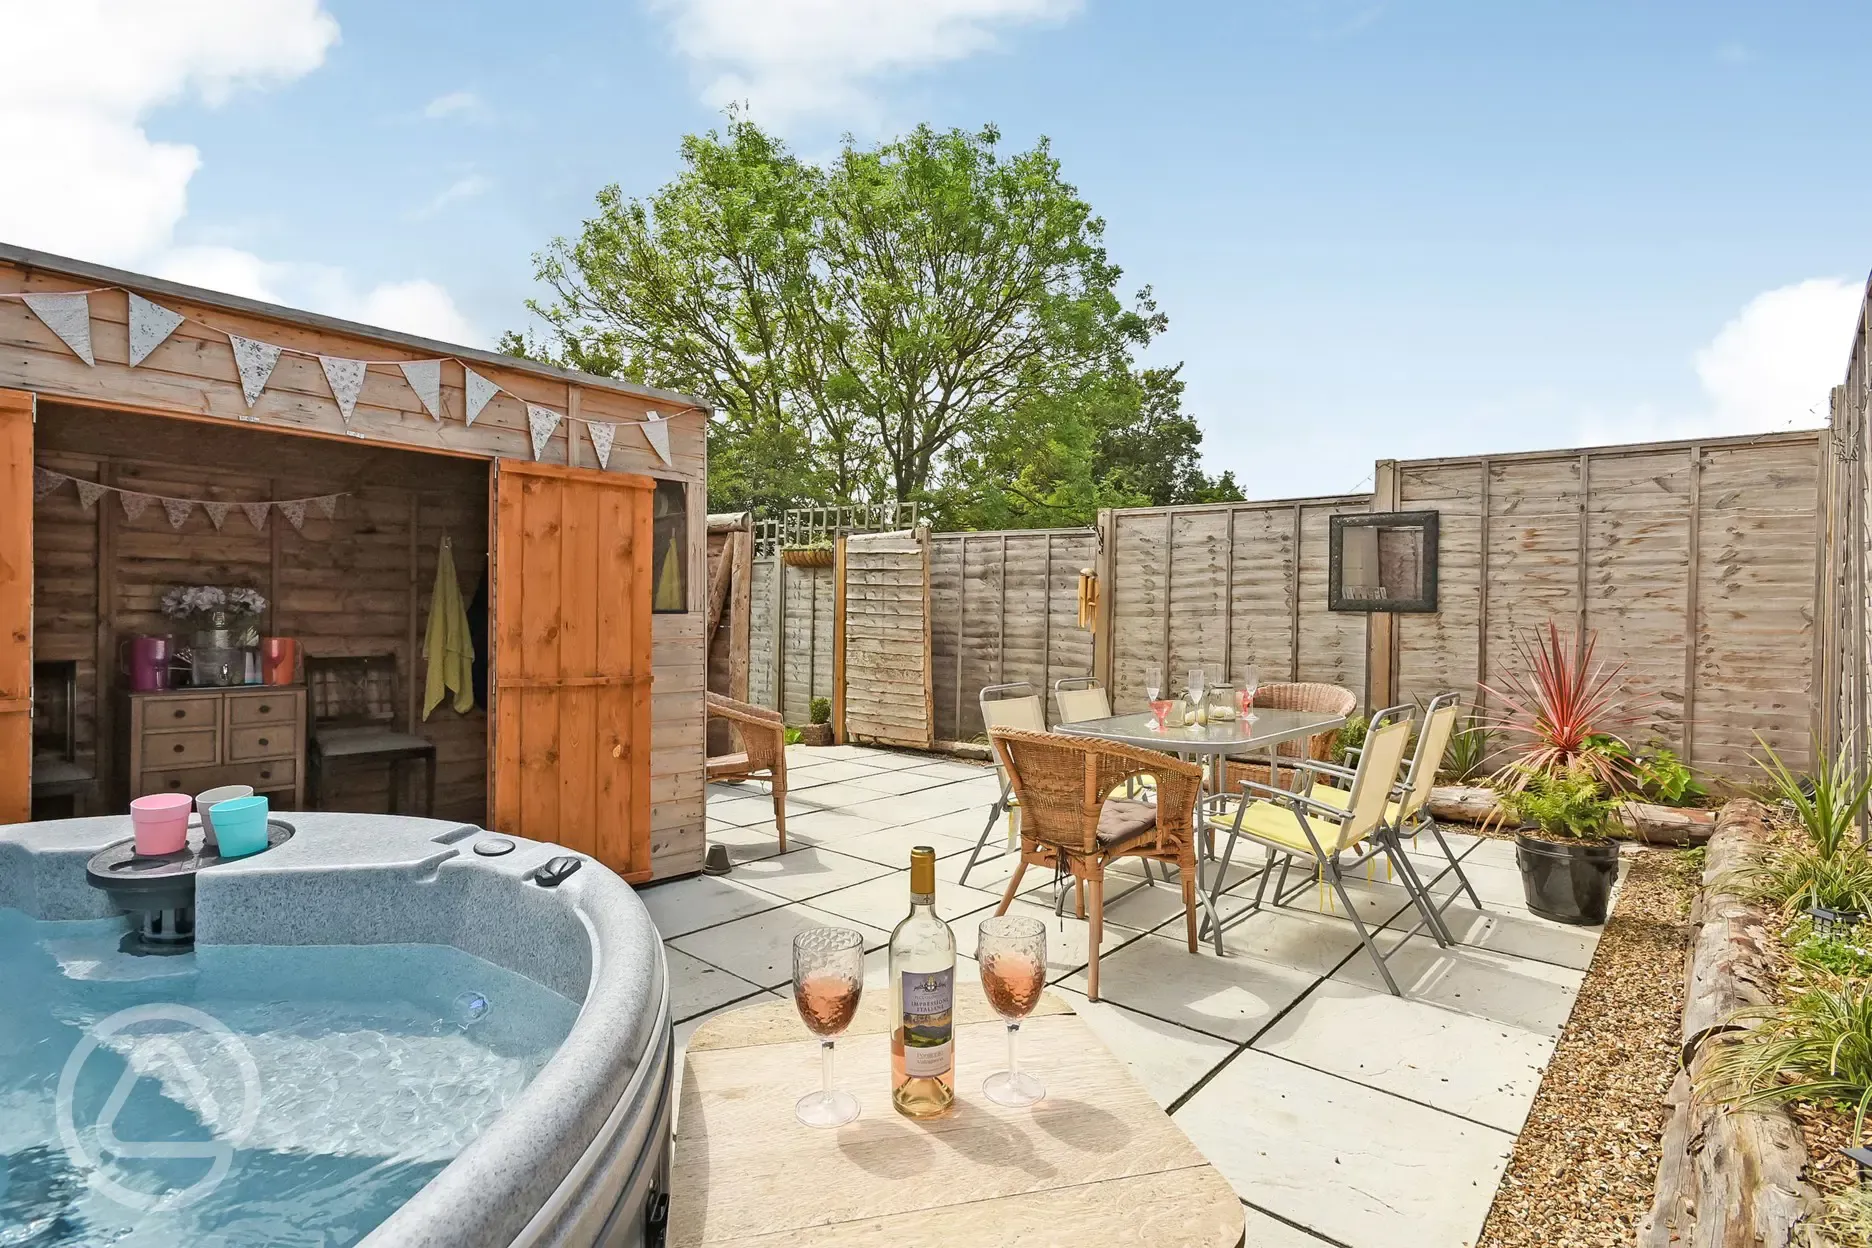 Private, unlimited use of the hot tub is included with your stay